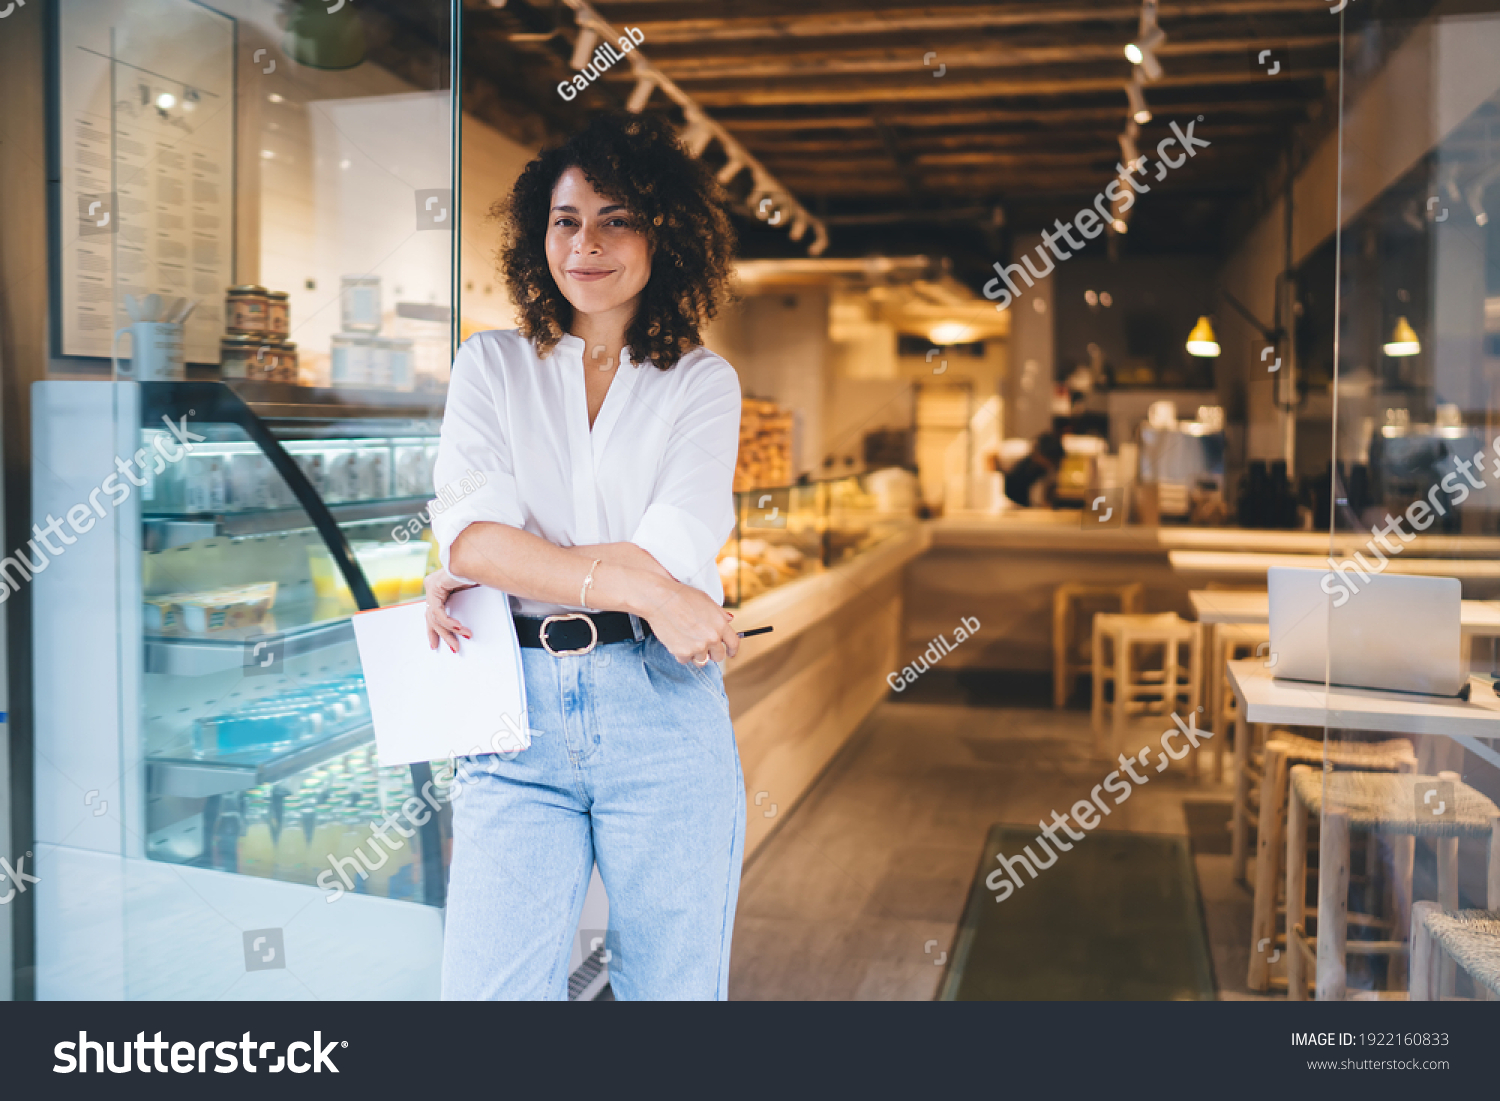 Half length portrait of prosperous manager of local bakery smiling at camera during work day in franchise takeaway cafe, happy woman with paper statistics enjoying time for improve own coffeehouse #1922160833